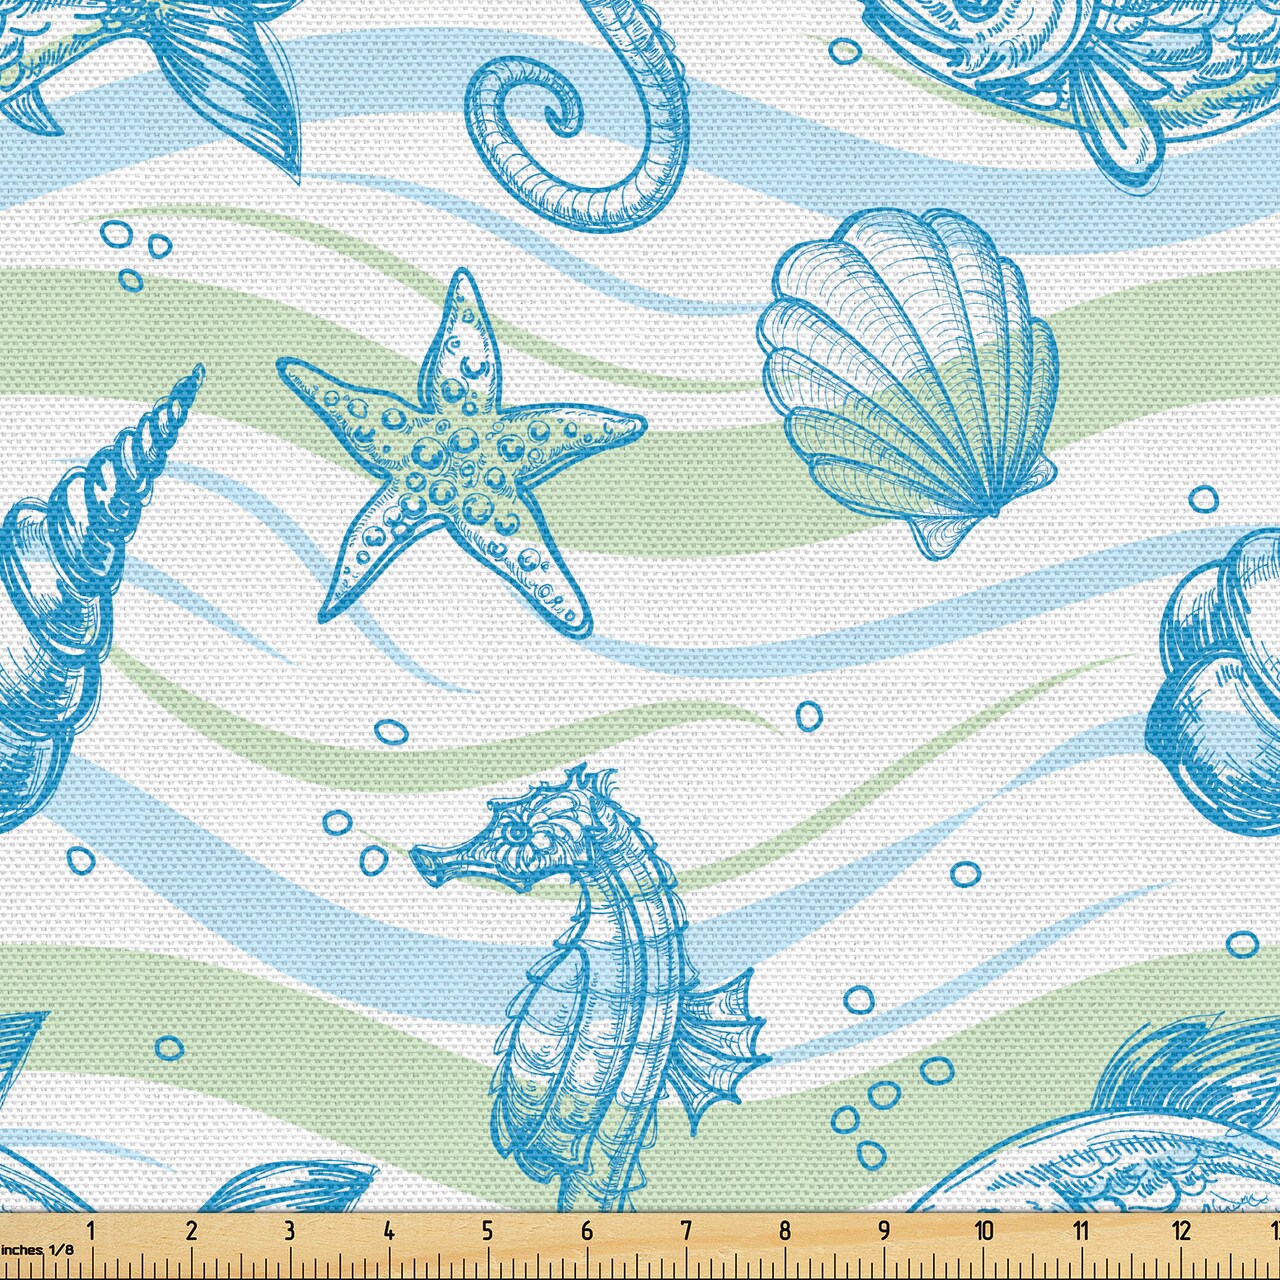 Ambesonne Nautical Fabric by The Yard, Marine Ocean Shell Starfish Oyster Mollusk Sea Horse Underwater Aquatic Pattern, Decorative Fabric for Upholstery and Home Accents, 2 Yards, Mint Blue